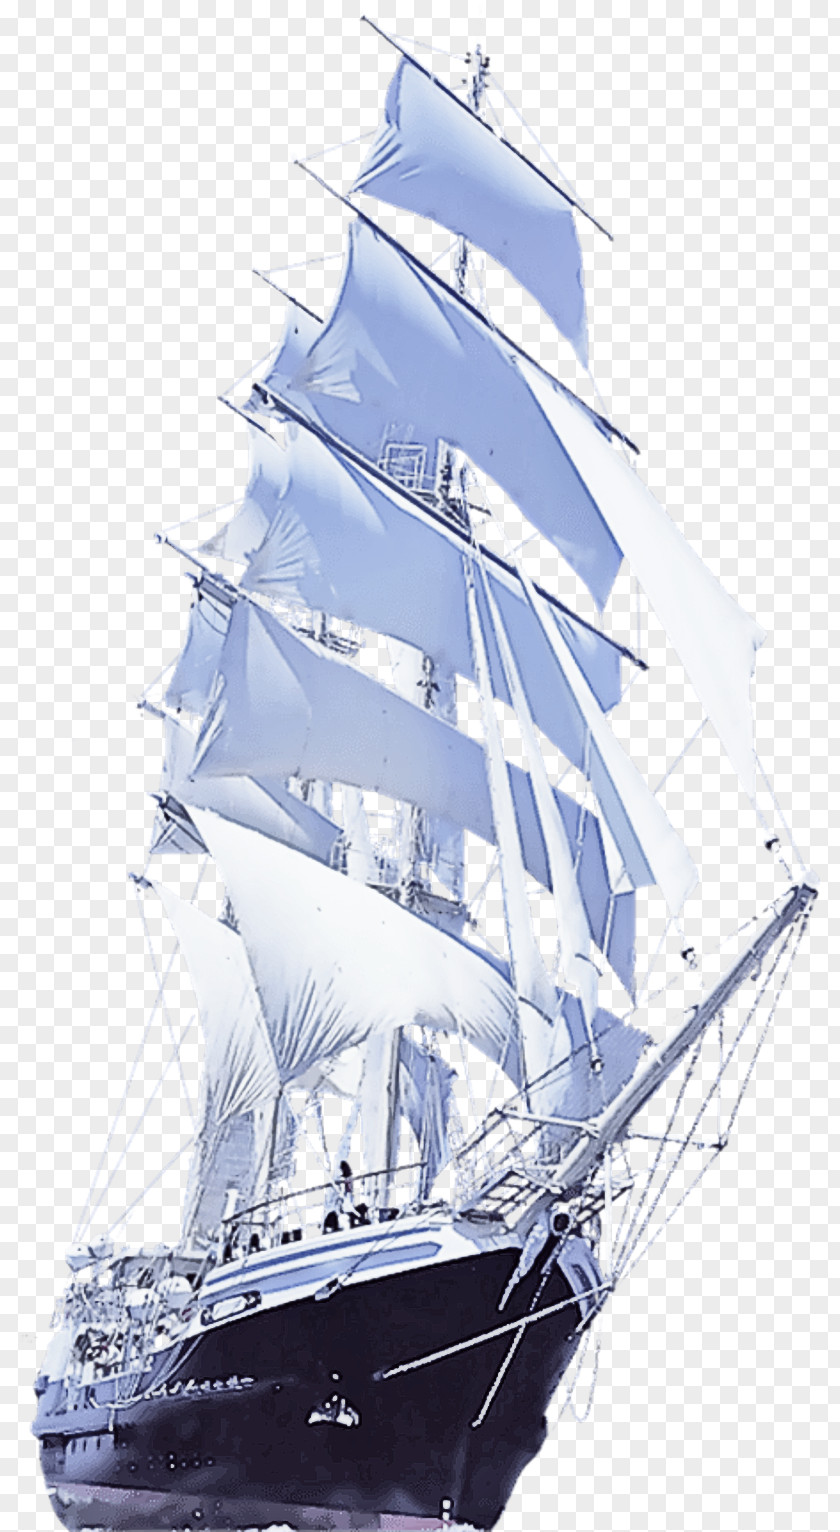 Sailing Ship Tall Full-rigged Vehicle Barquentine PNG